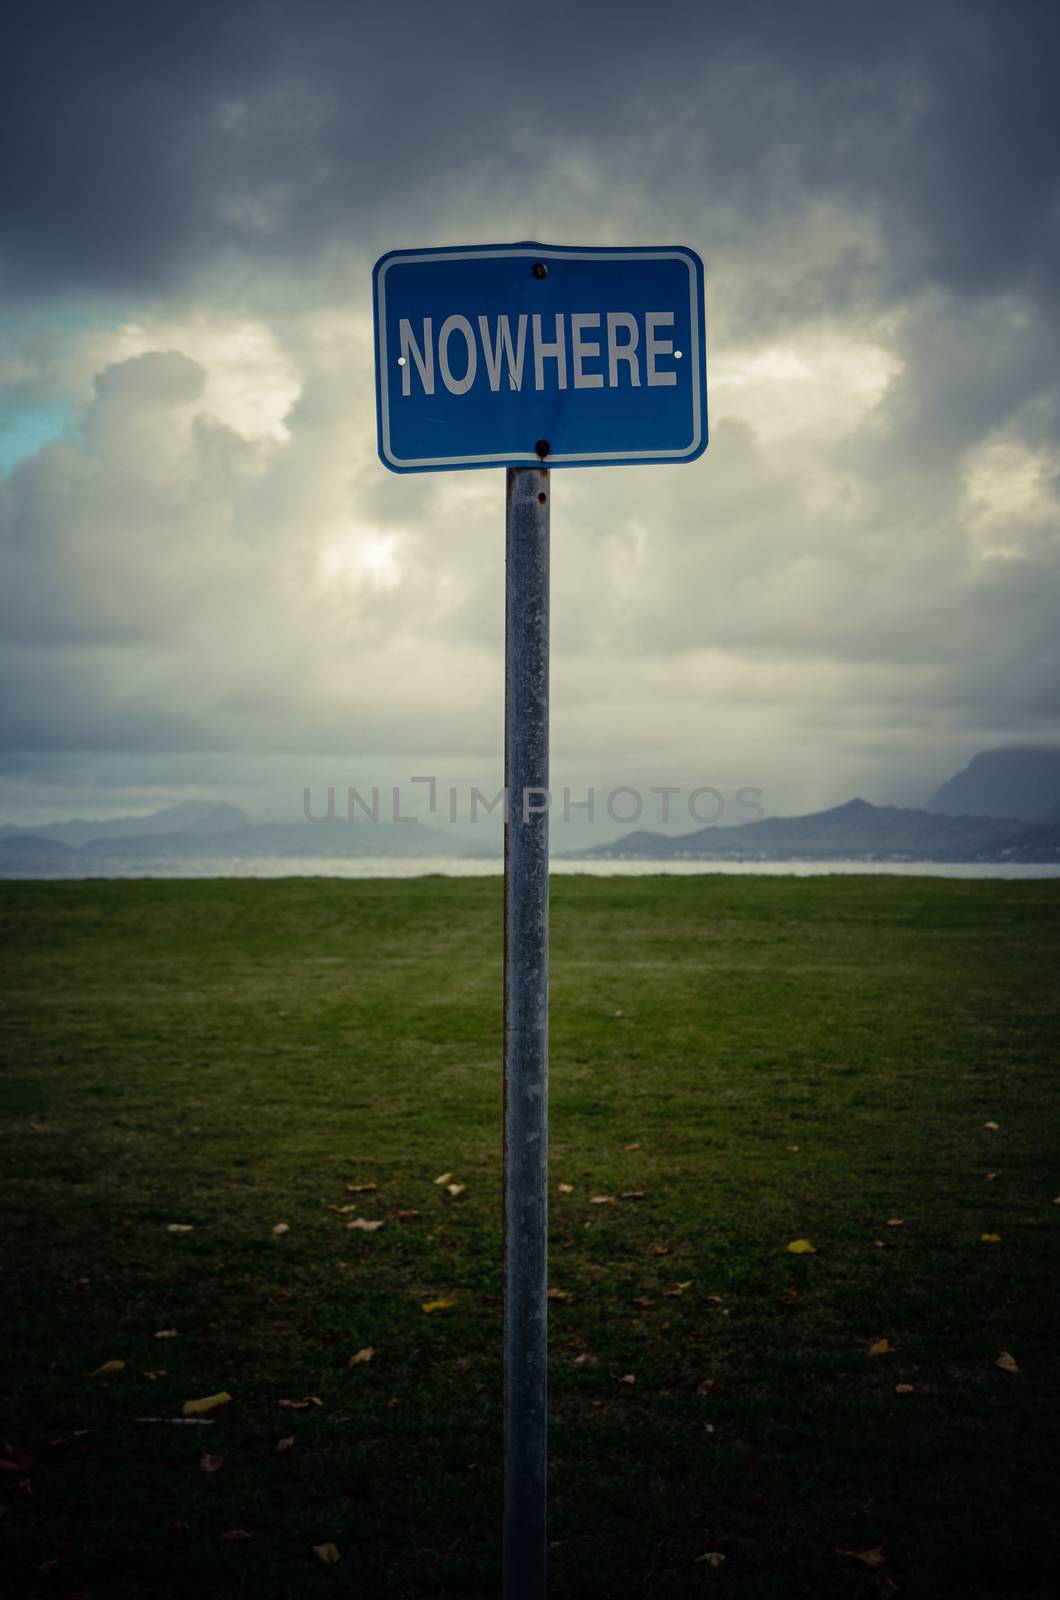 Conceptual Image Of A 'Nowhere' Sign In An Empty Wilderness